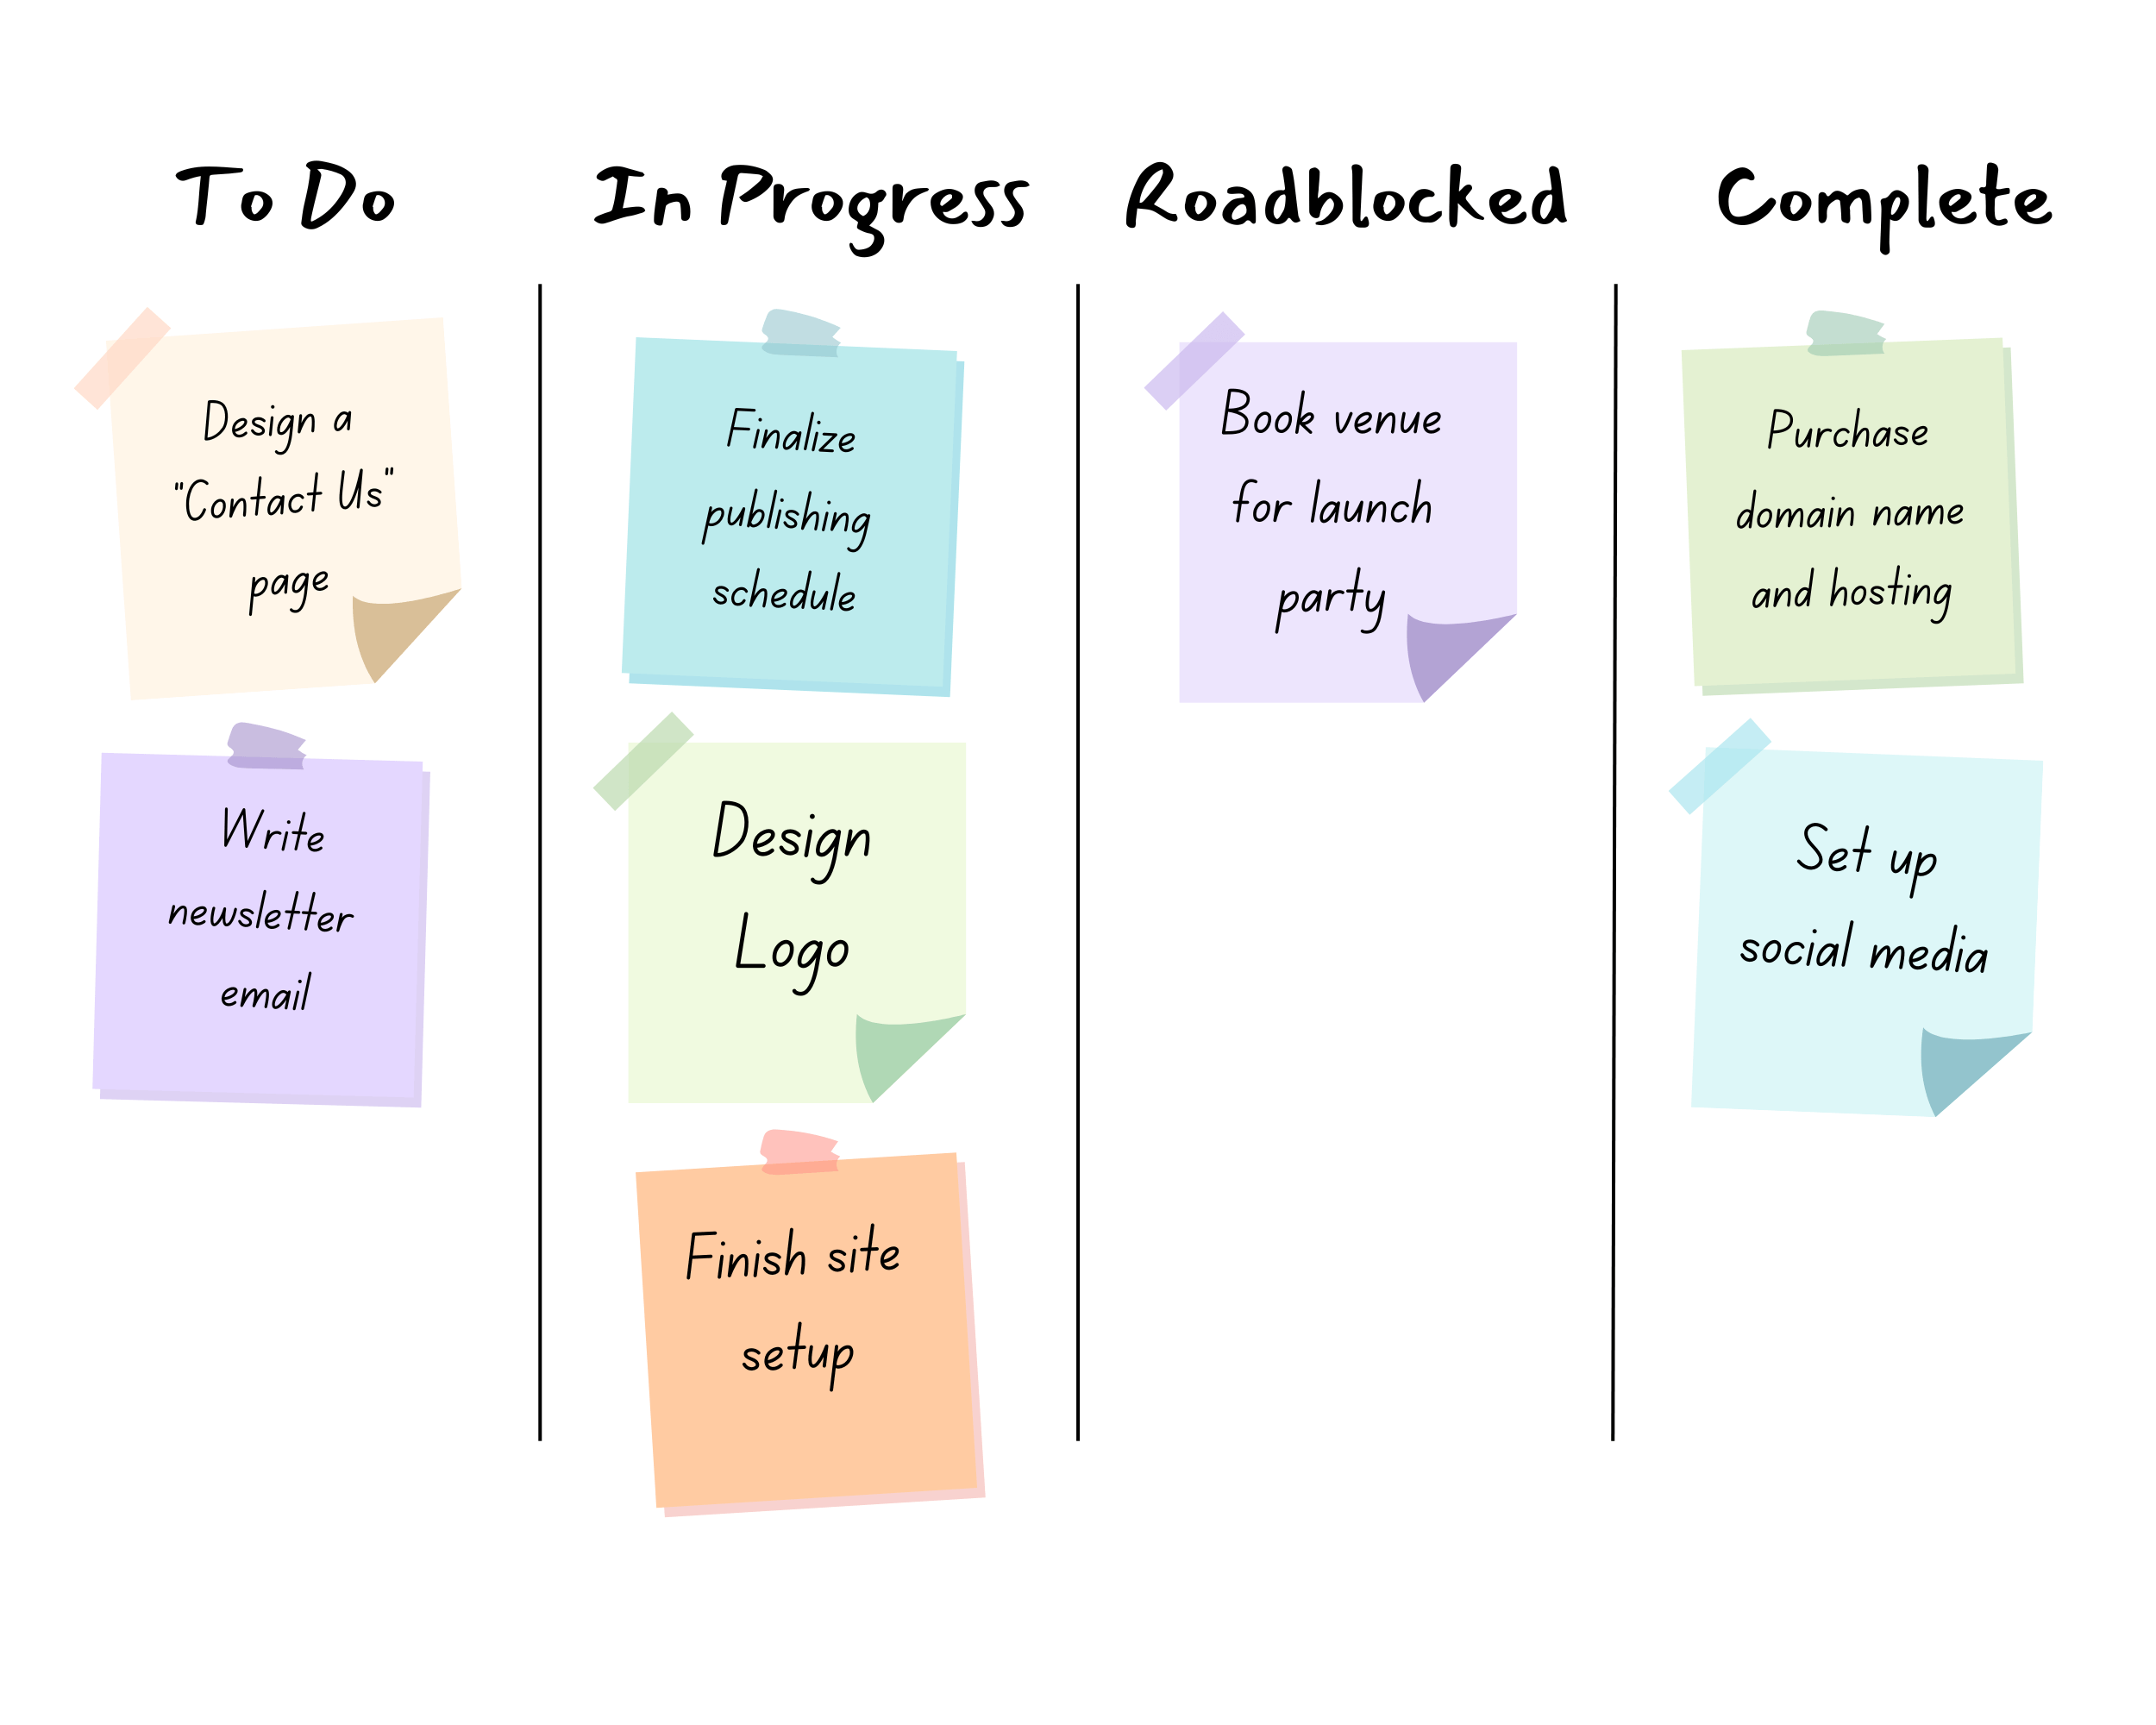 A simple illustration of how Kanban could work using sticky notes.